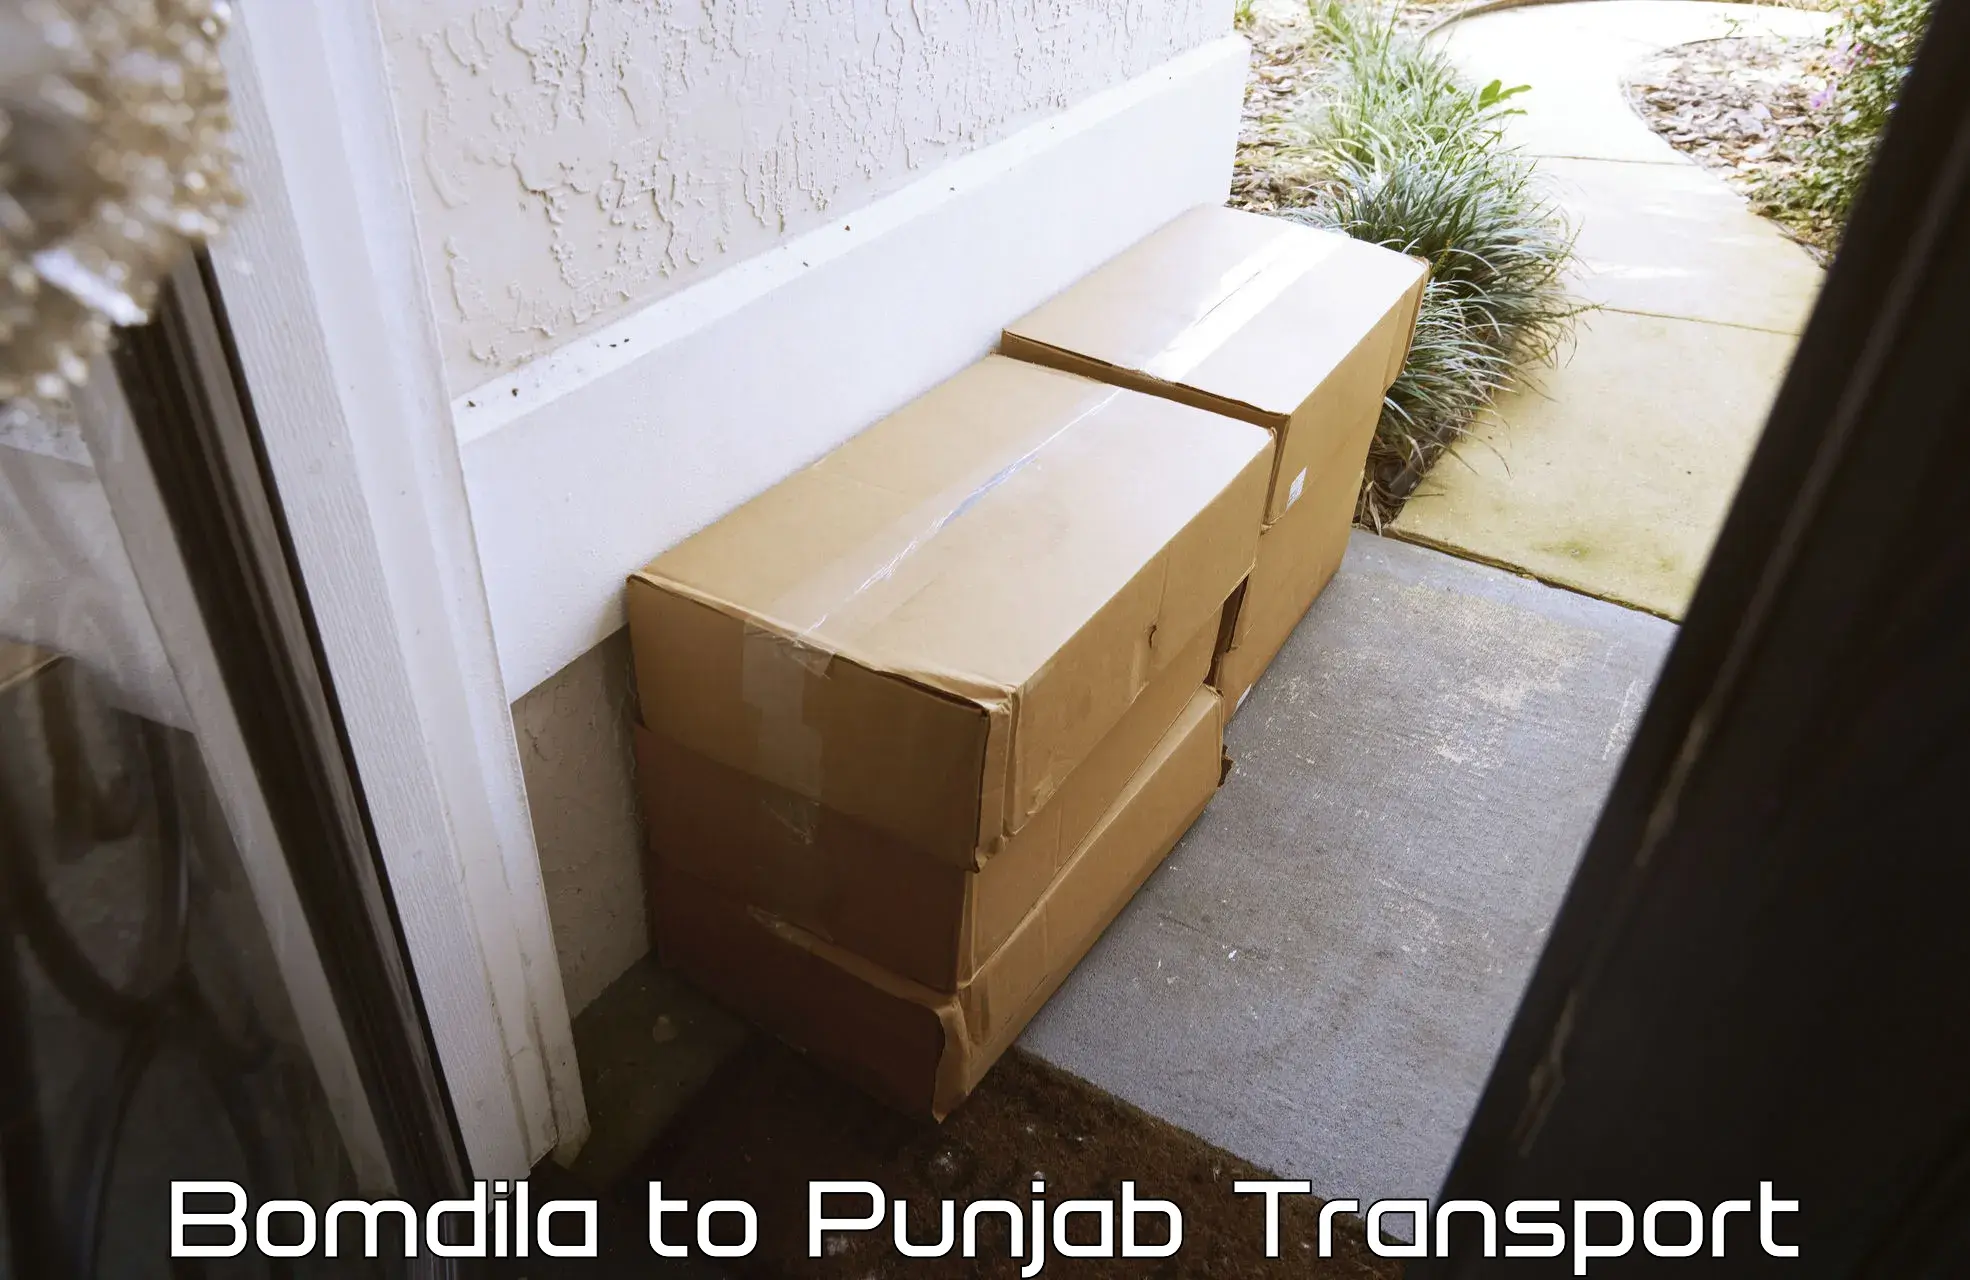 Transport bike from one state to another Bomdila to Jalandhar